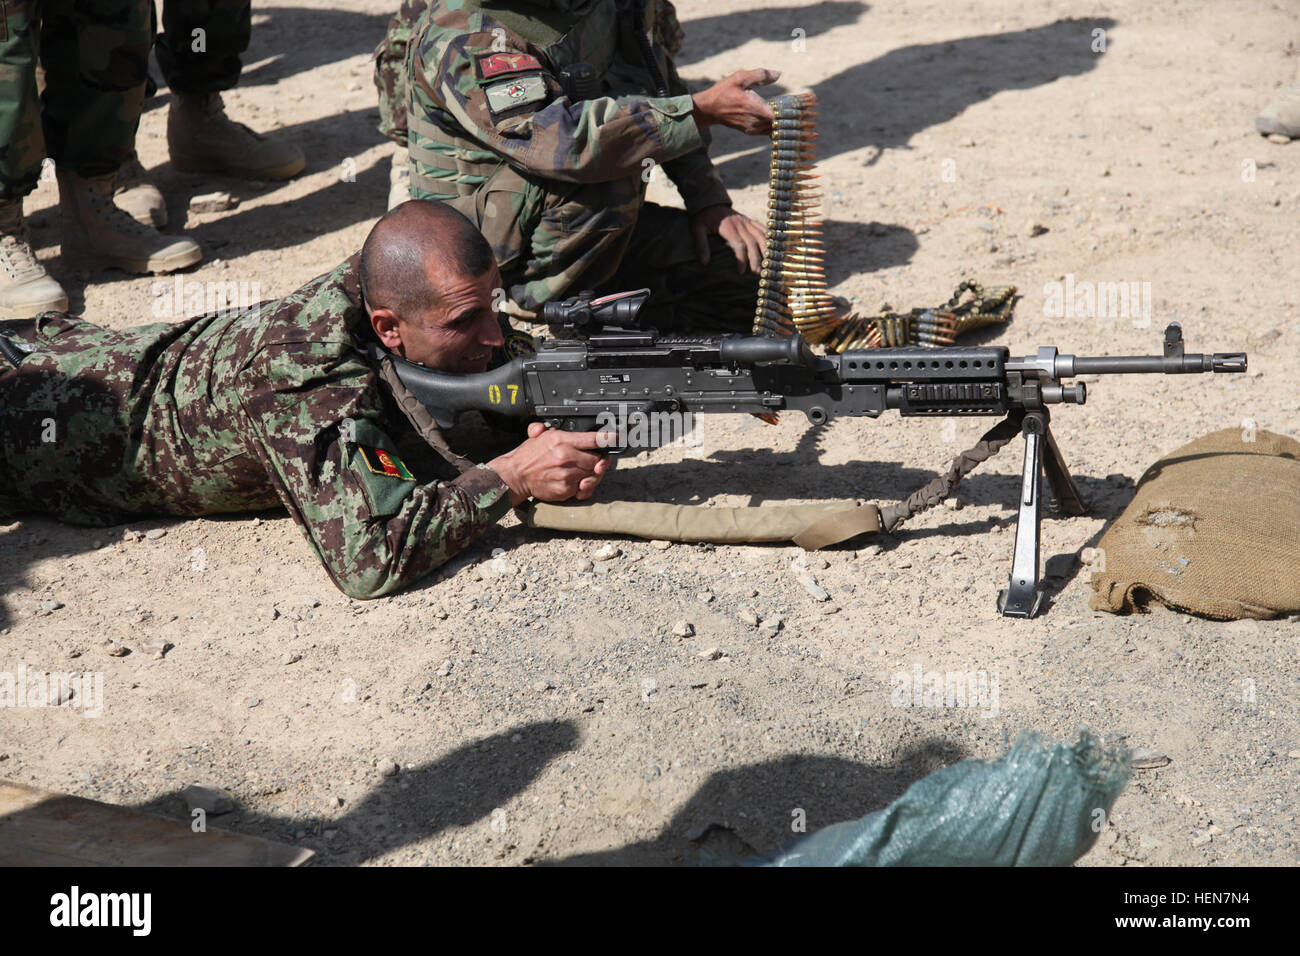 The Afghan National Army Sergeant Major of the Army Roshan Safi test fires a M240B machine gun during a VIP visit to the Commando School of Excellence, Kabul province, Afghanistan, Oct. 29, 2011. The Afghan SMA was visiting the school to tour the facilities and observe class demonstrations. (U.S. Army photo by Spc. Matthew Minkema)(Released) VIP visit 481555 Stock Photo